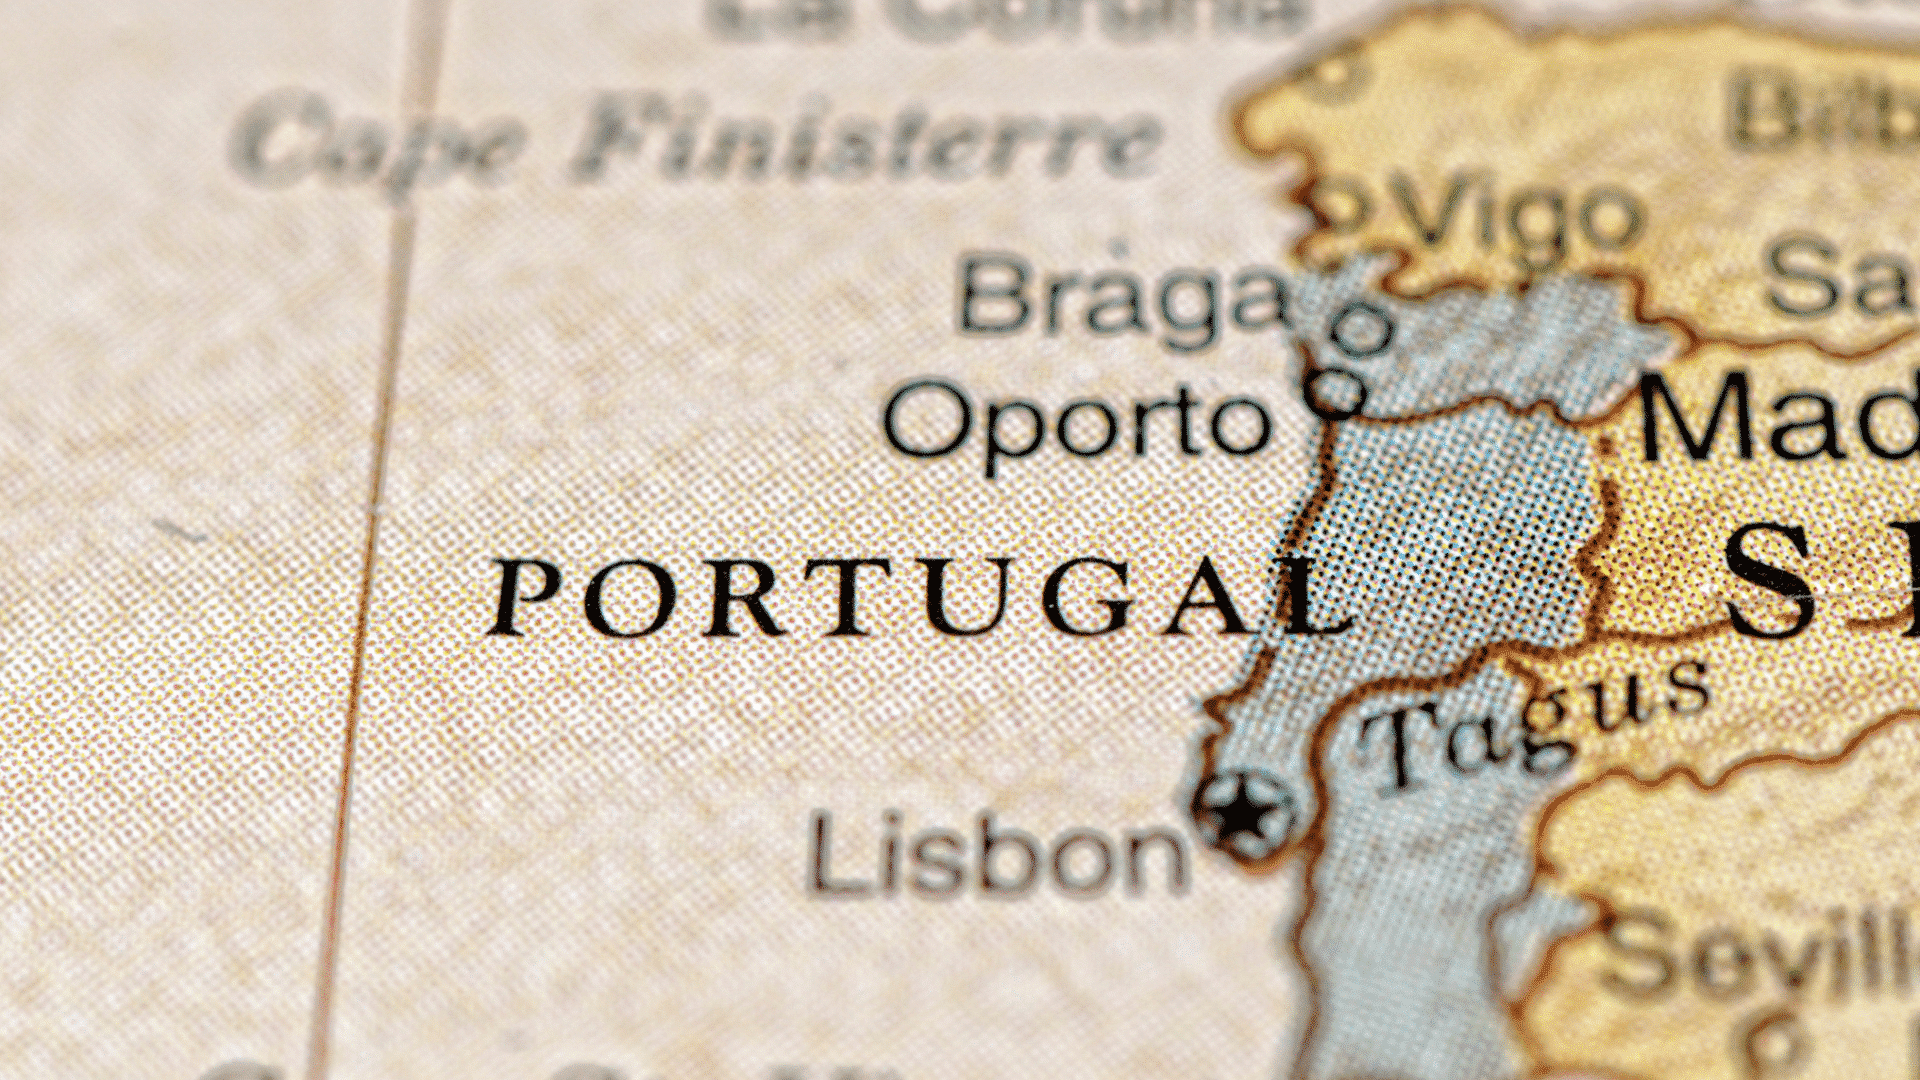 Portugal Map 